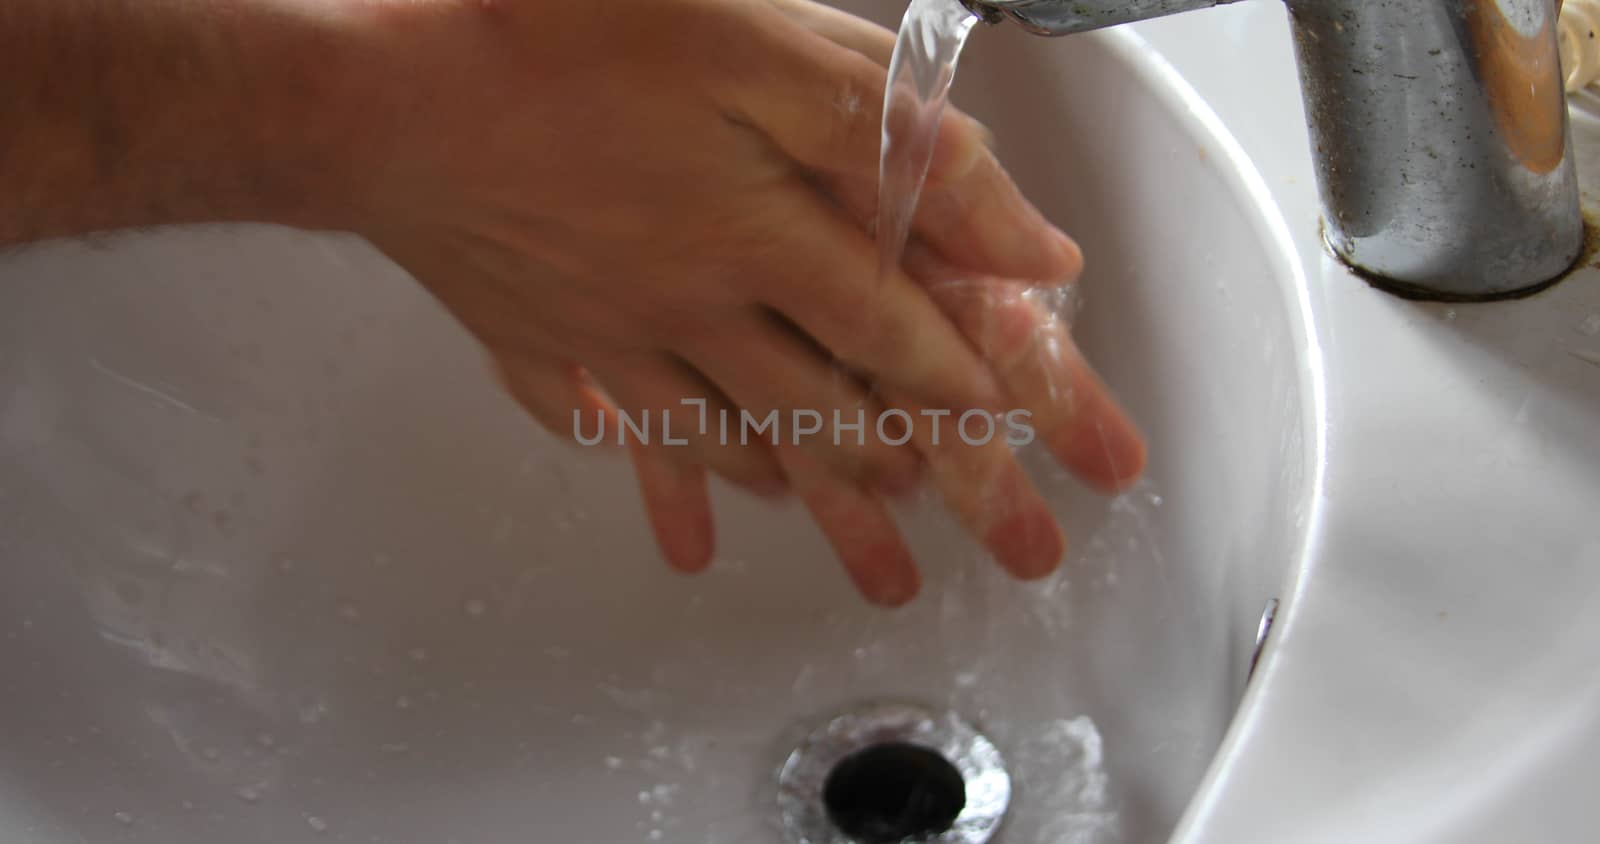 Man washes his hands thoroughly in the sink by Dr-Lange